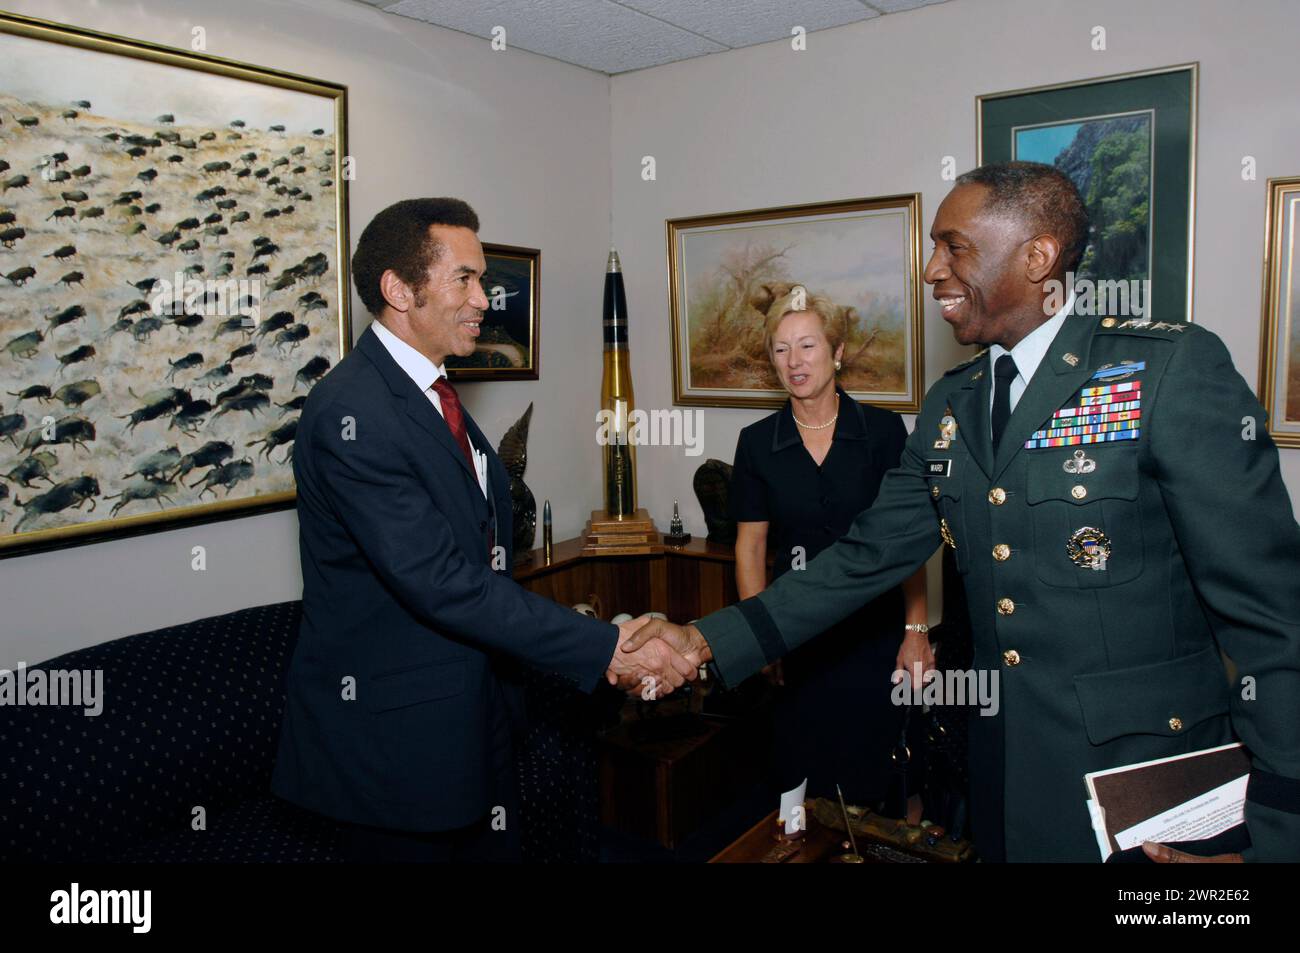 U.S. Army Gen. William Ward, right, commander of the U.S. Africa Command, meets with the Botswana Vice President, Ian Khama, left, during the general's visit to Gaborone, Botswana, Dec. 3, 2007. U.S. Ambassador to Botswana, Katherine Canavan looks on. (U.S. Air Force photo by Tech. Sgt. Nic Raven/Released) Stock Photo